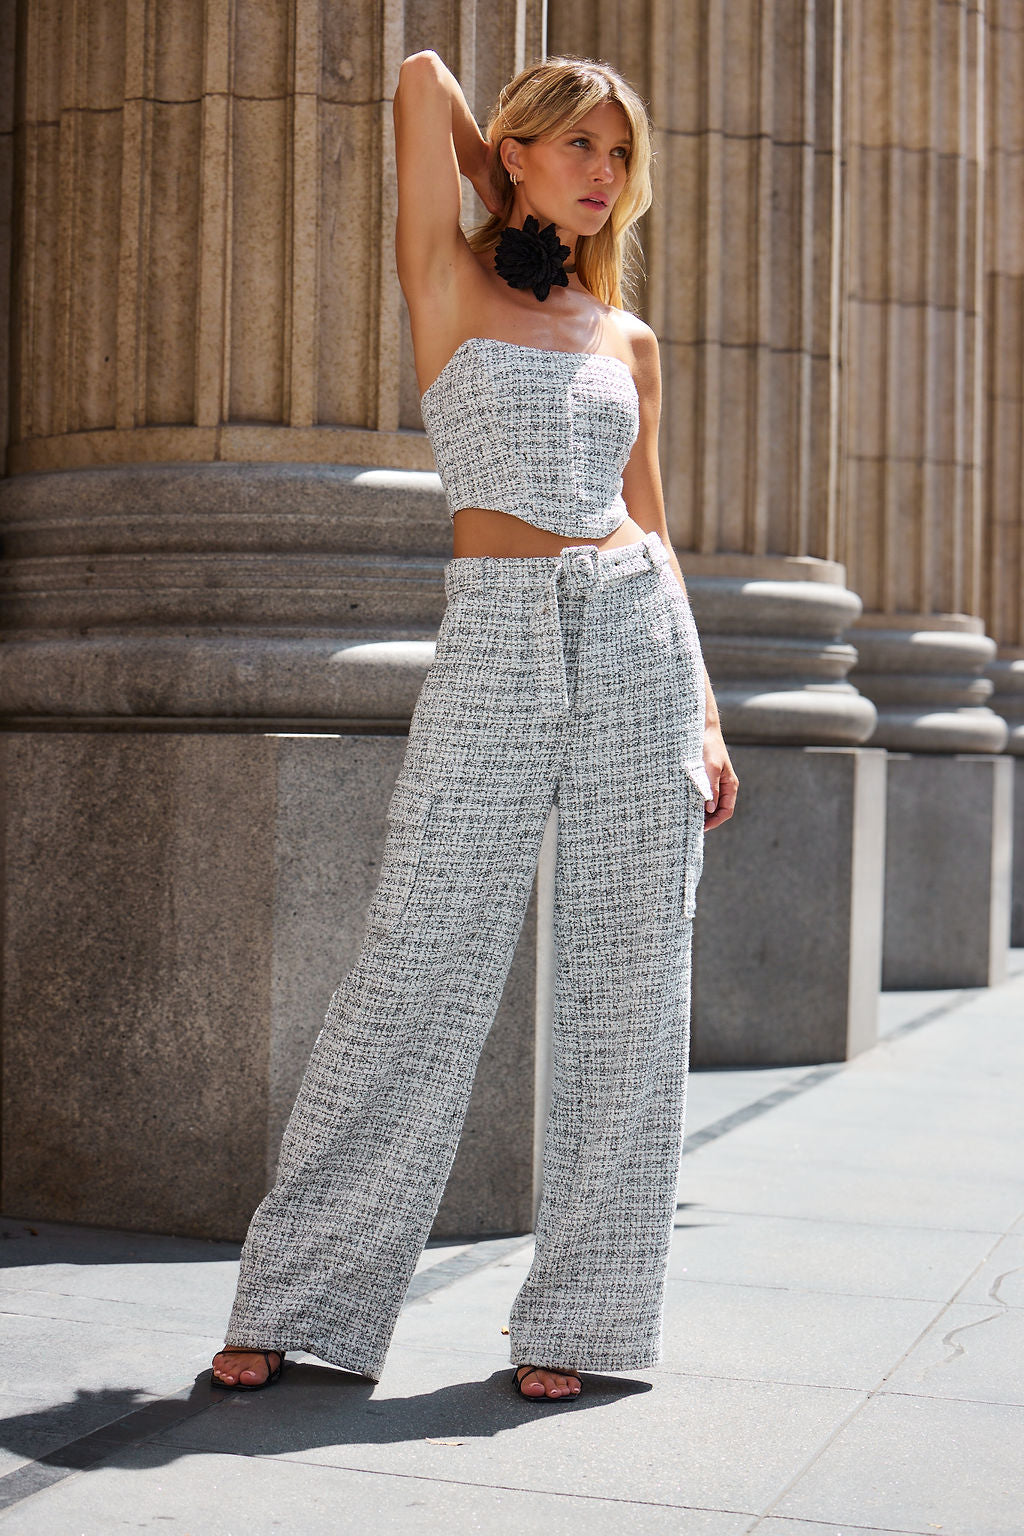 Make an epic statement in our Sequin Silver Flare Pants. These